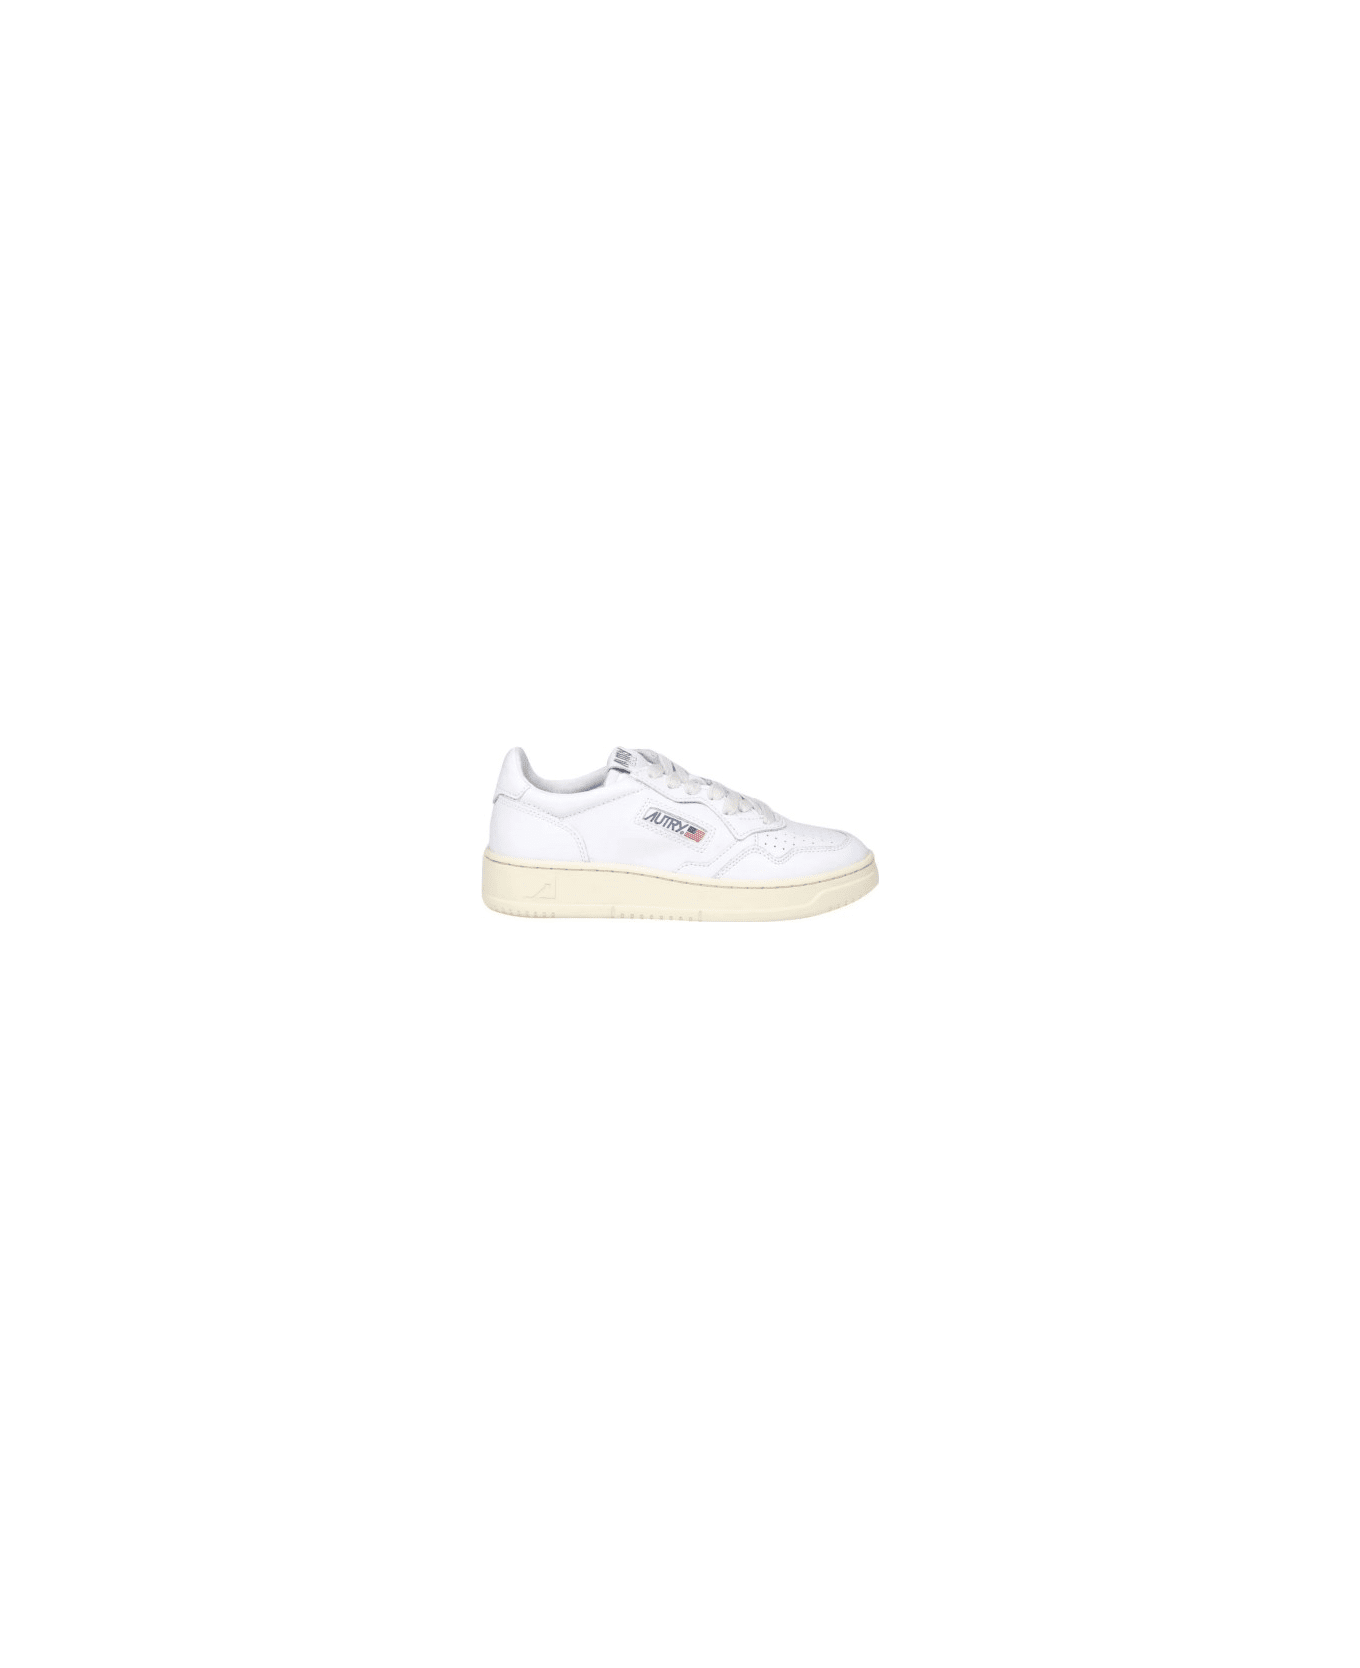 Autry Medalist Low Sneaker In White Leather - Wht/wht